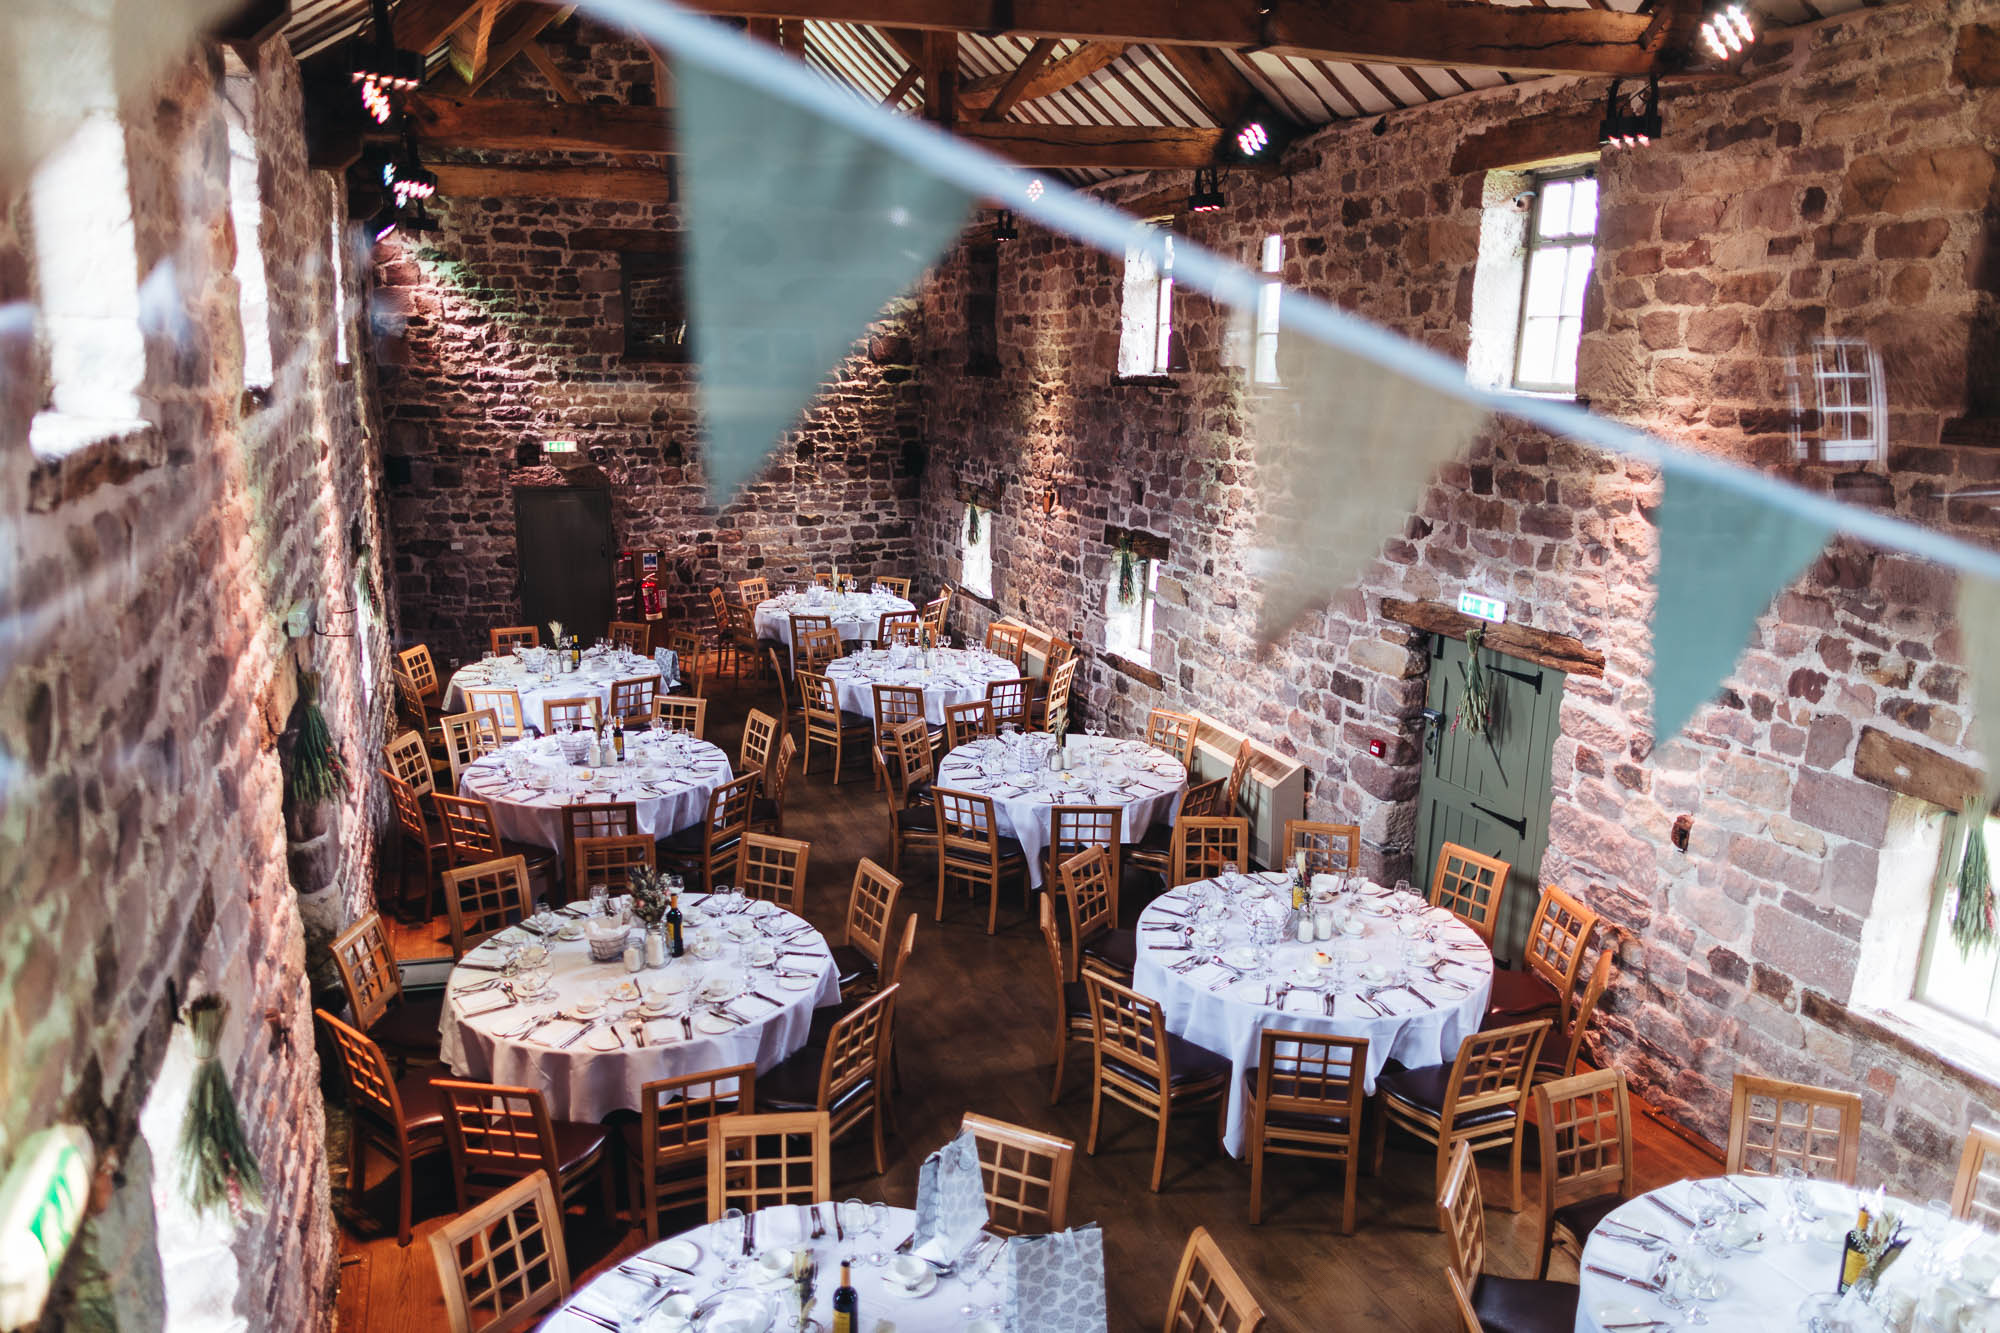 Wedding Breakfast set up in rustic barn at The Ashes Wedding Venue, Staffordshire